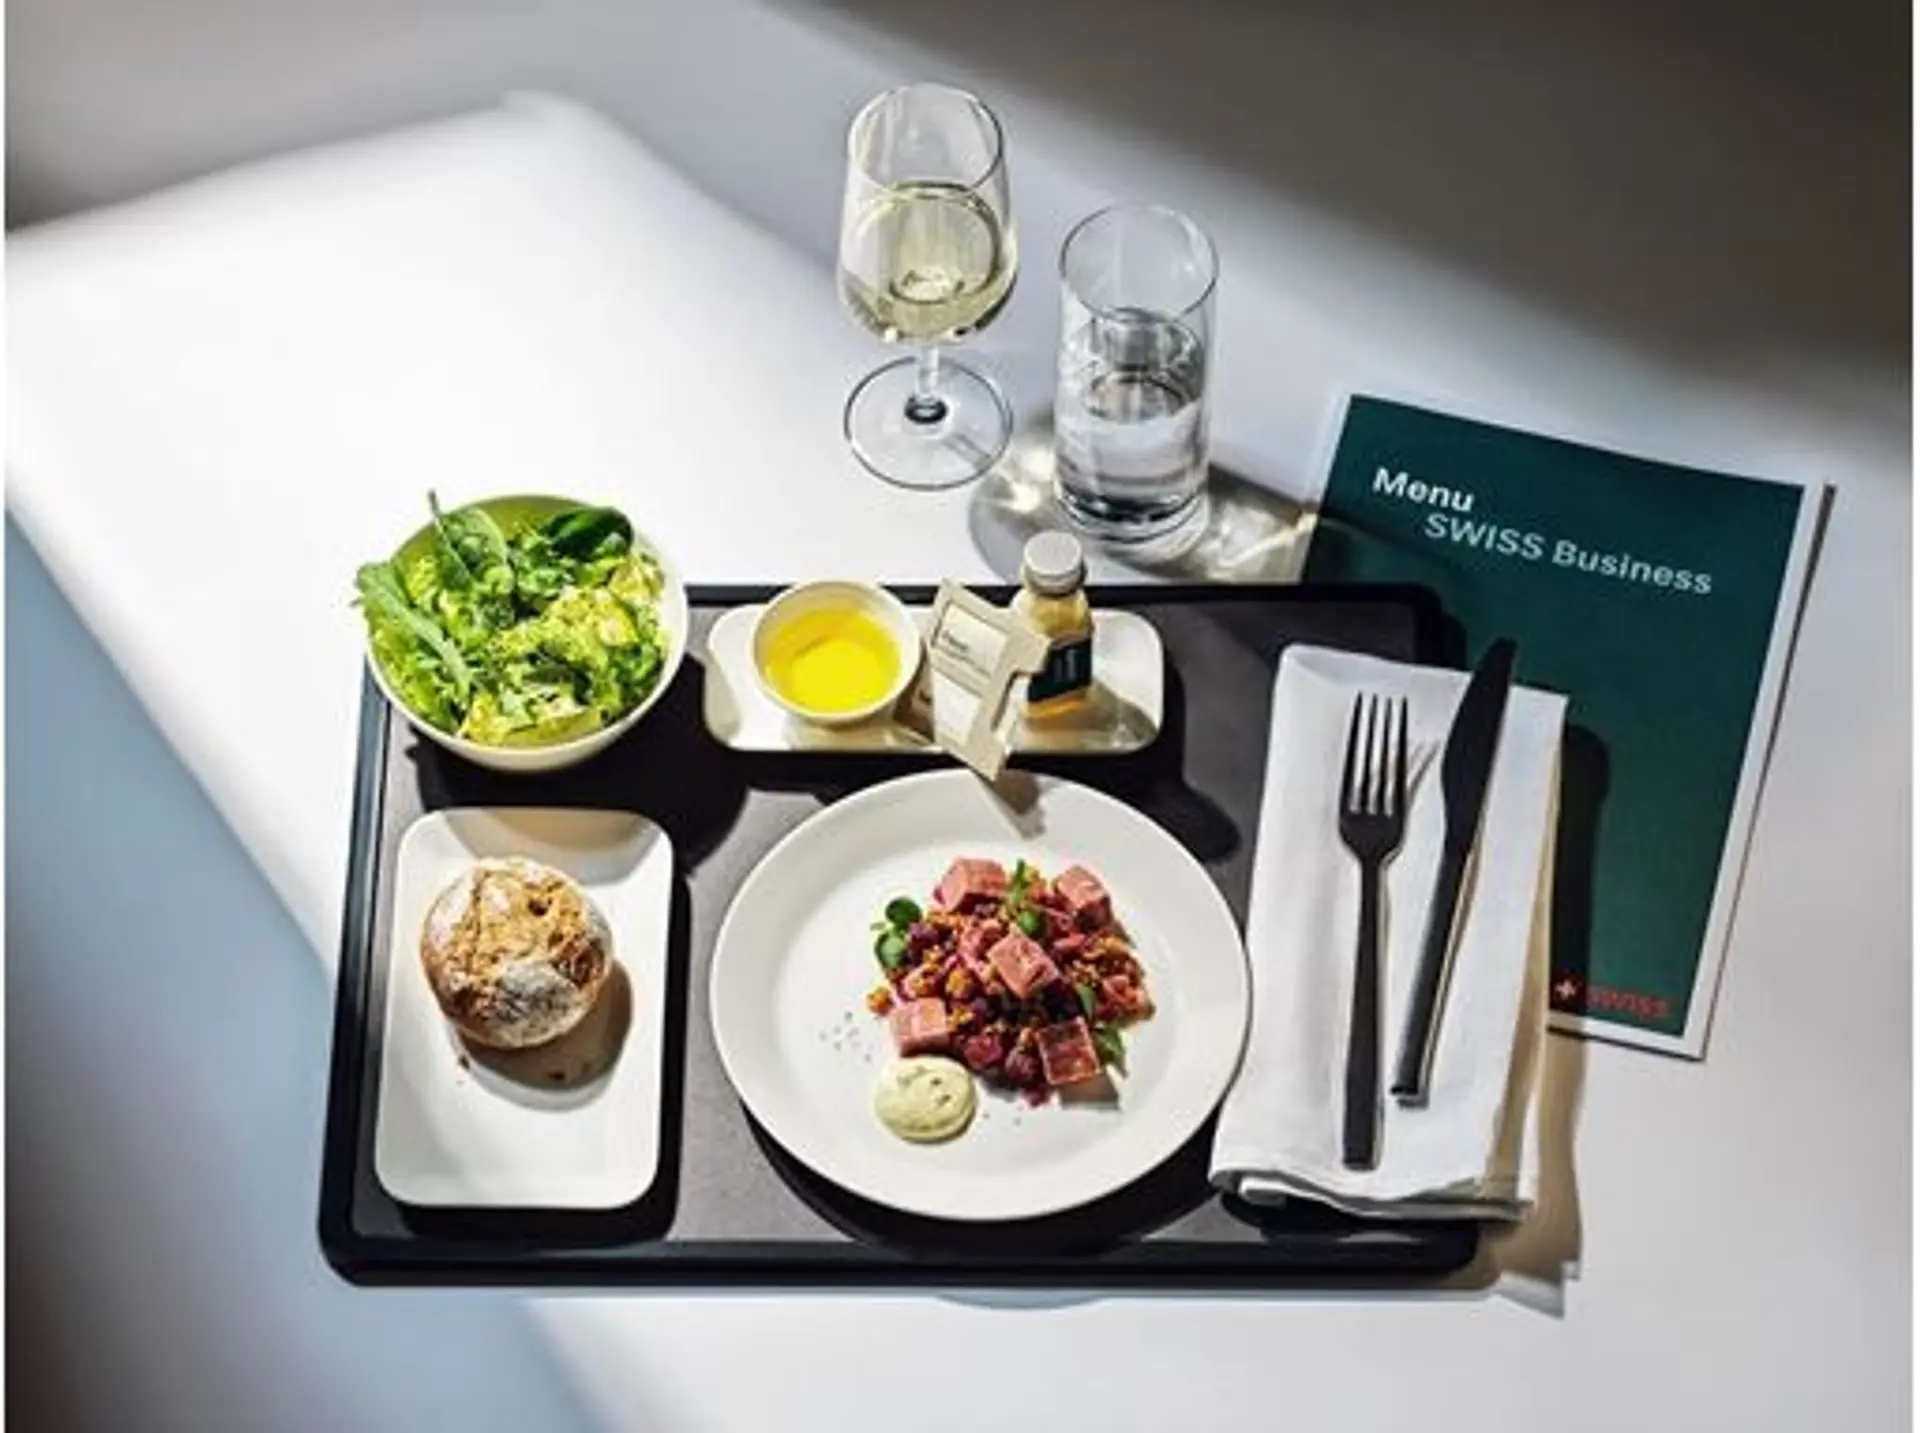 Airlines News - SWISS launches a new flight menu in collaboration with a Michelin-starred chef